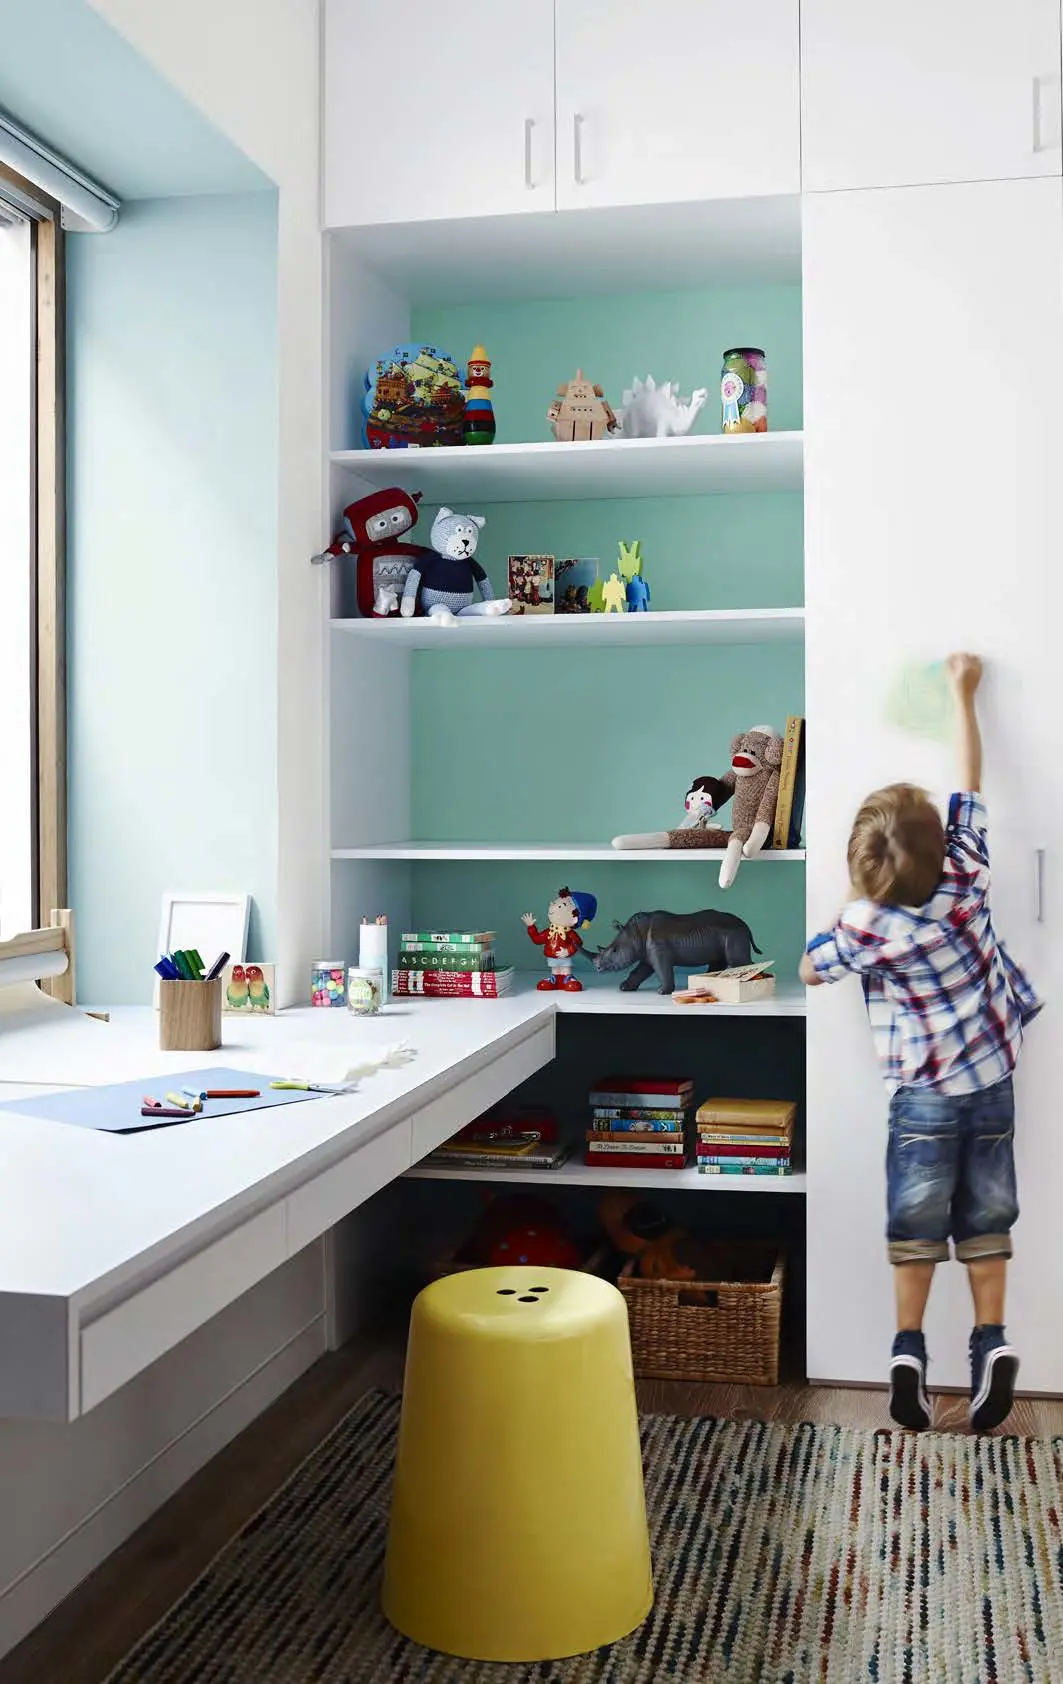 Boy colouring on wall in room